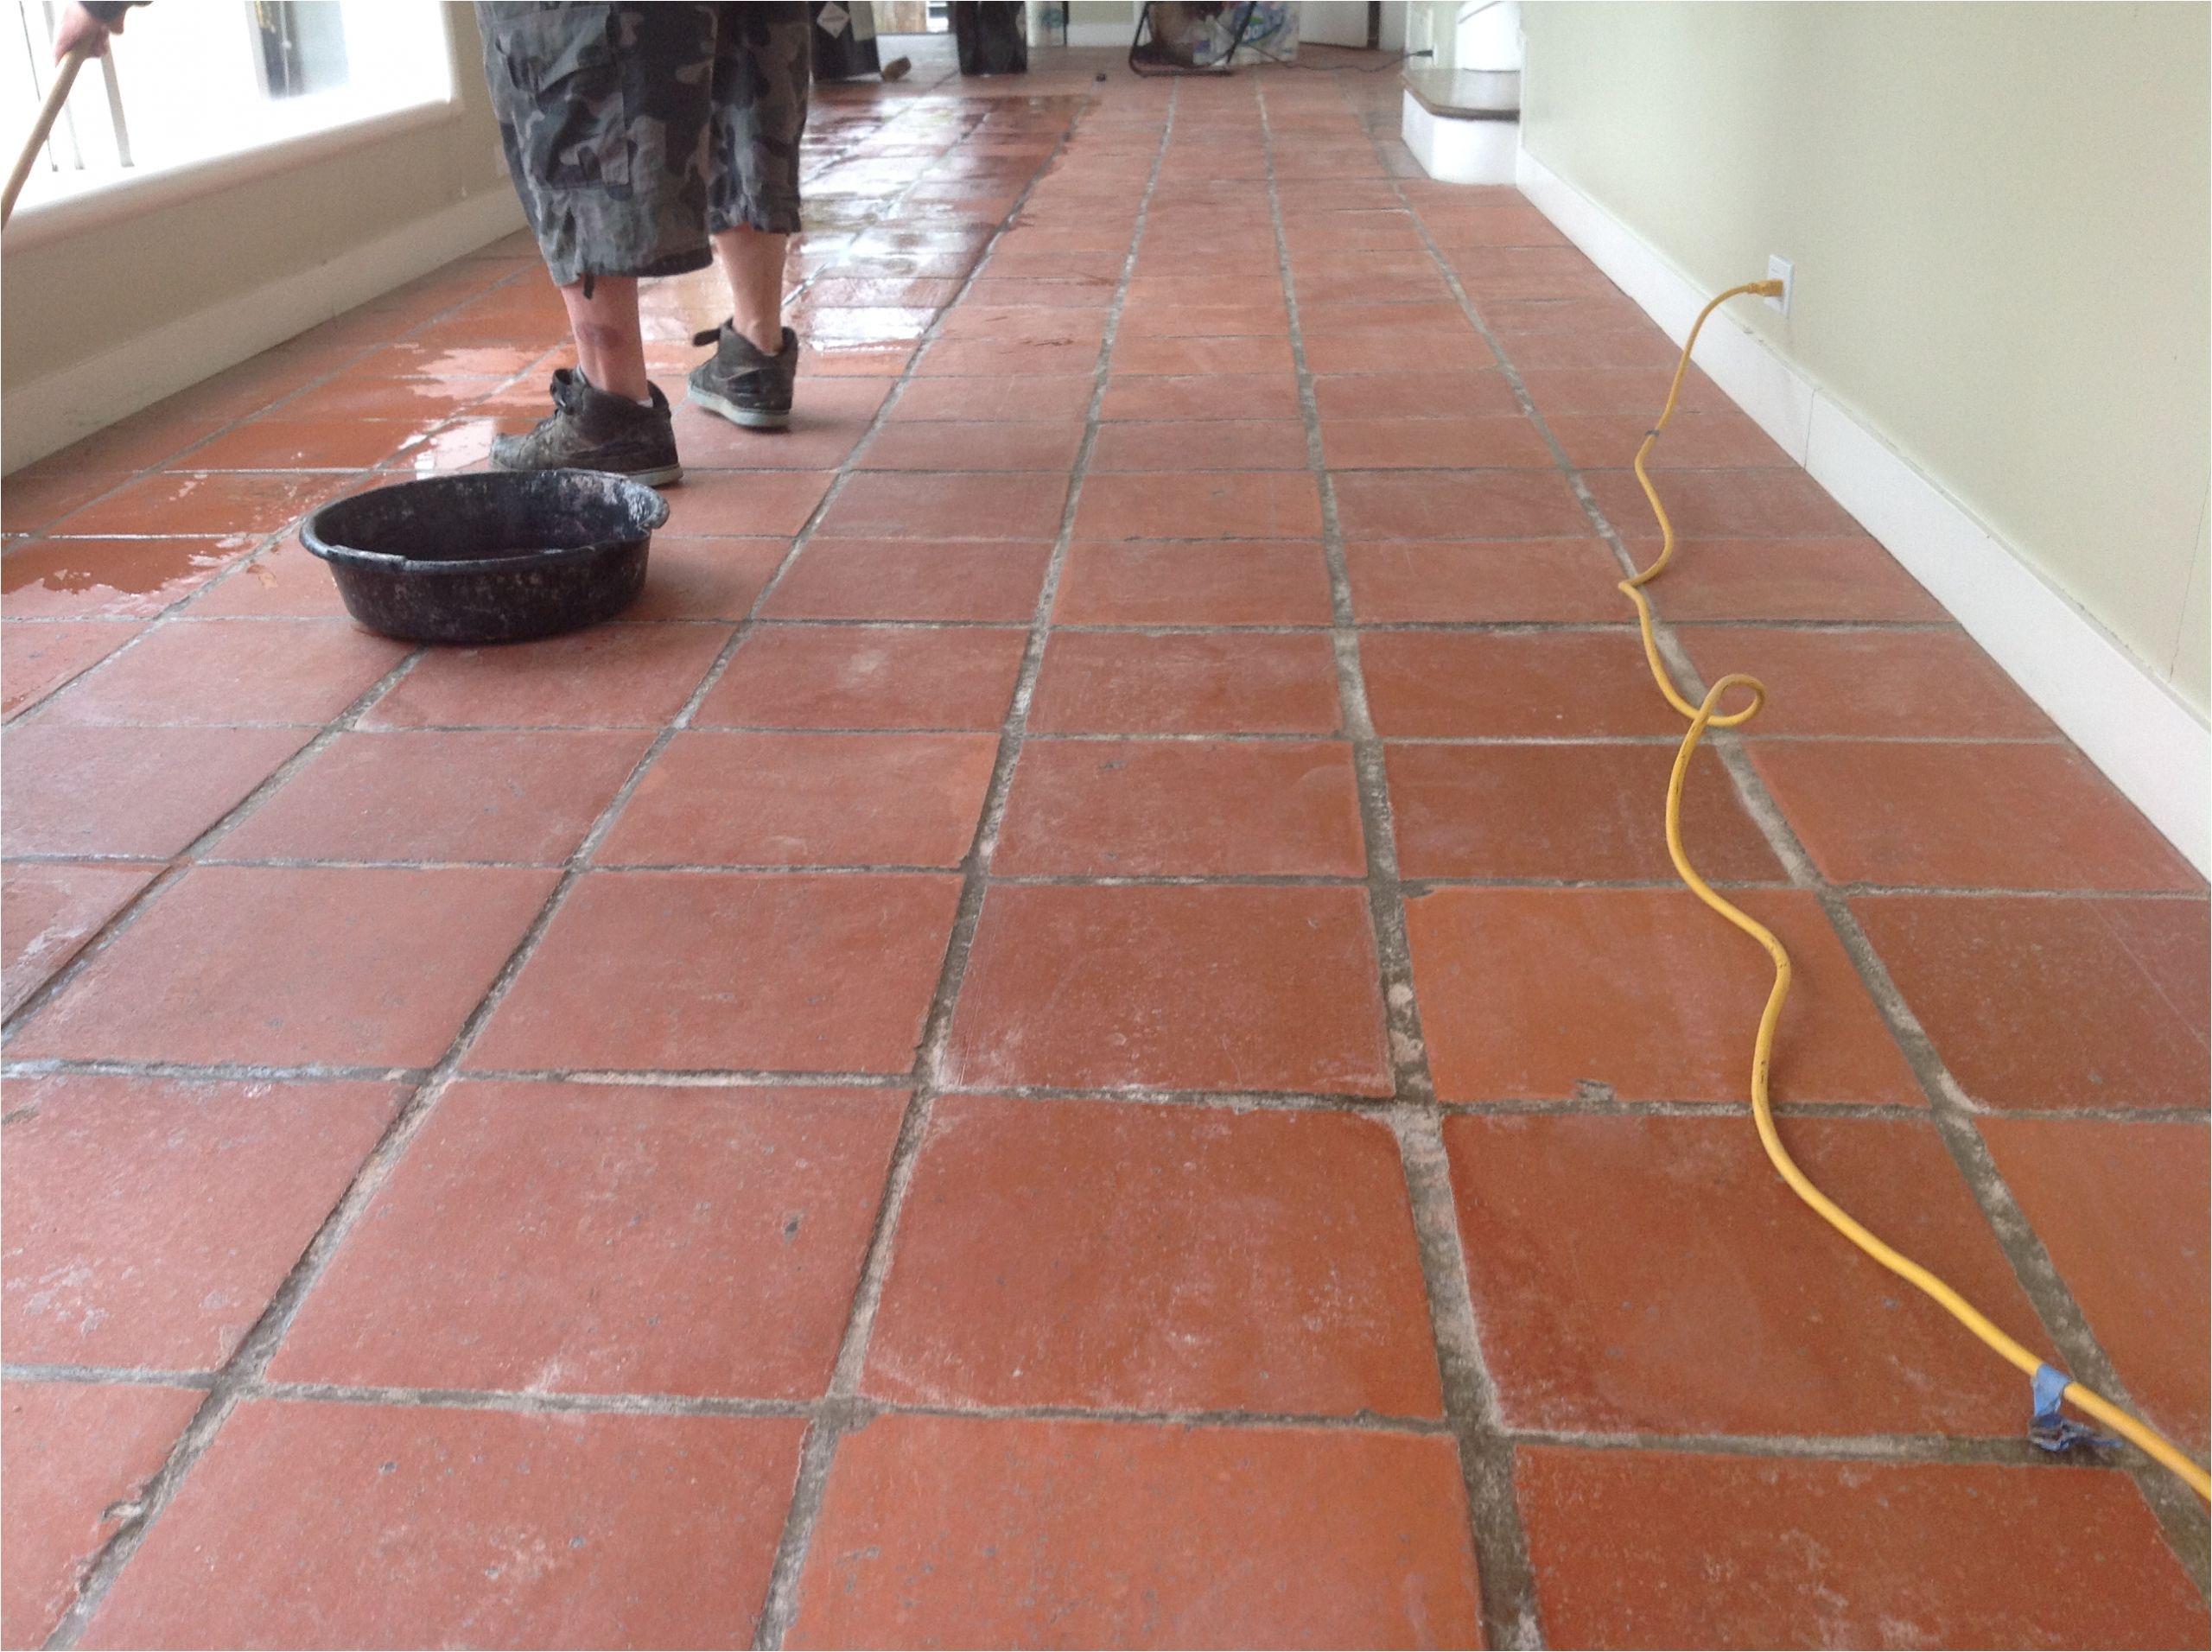 expert wax removal specialist of all antique pavers mexican pavers ceramic tile california tile restoration